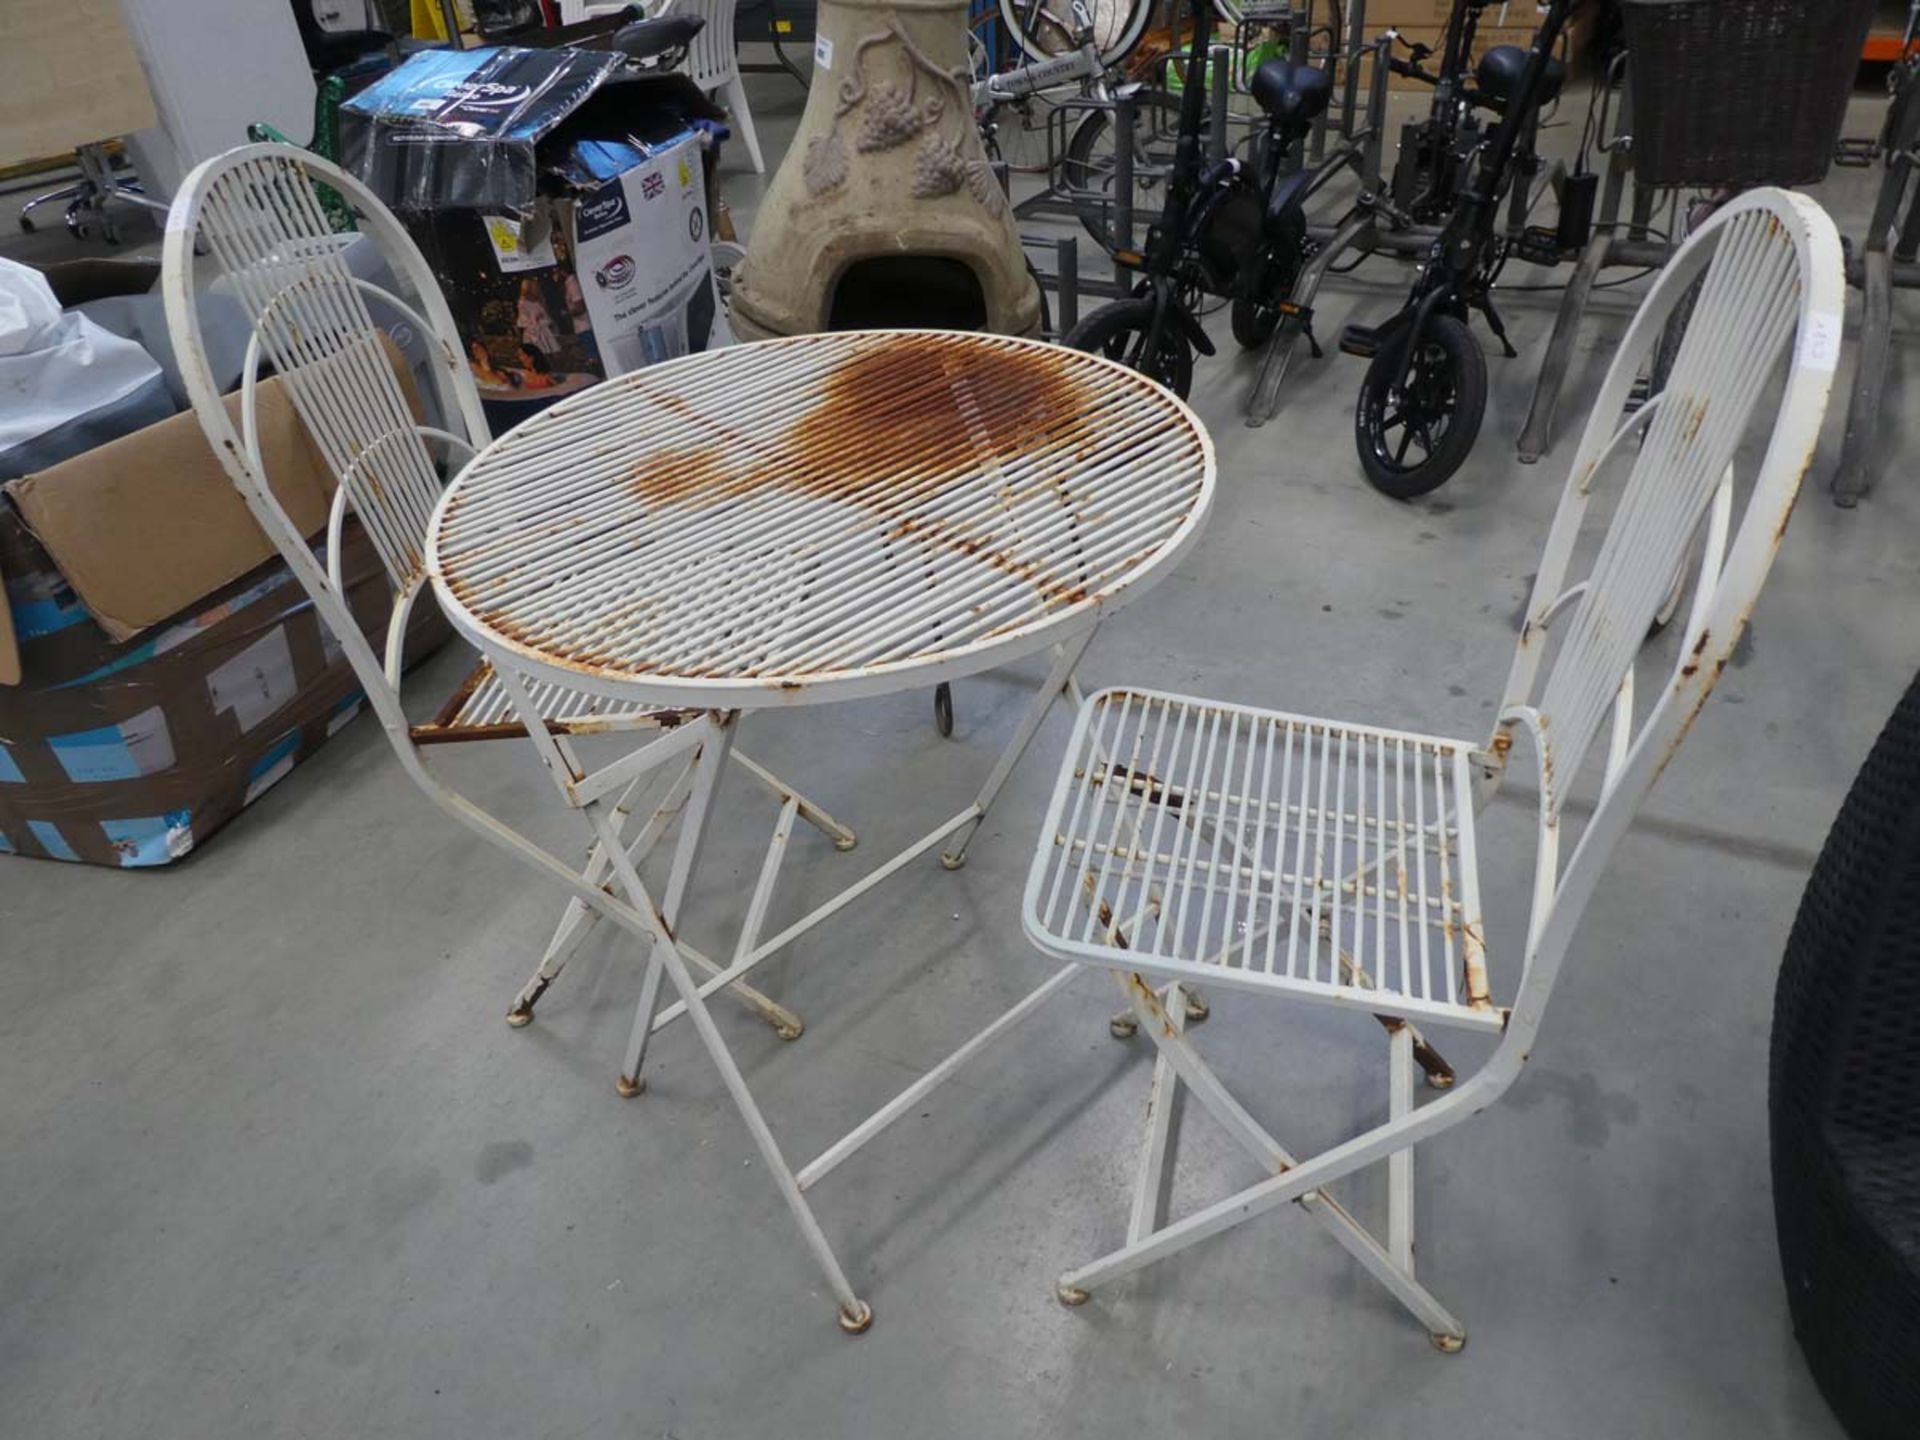 Metal bistro set consisting of 2 chairs and a round metal fold up table